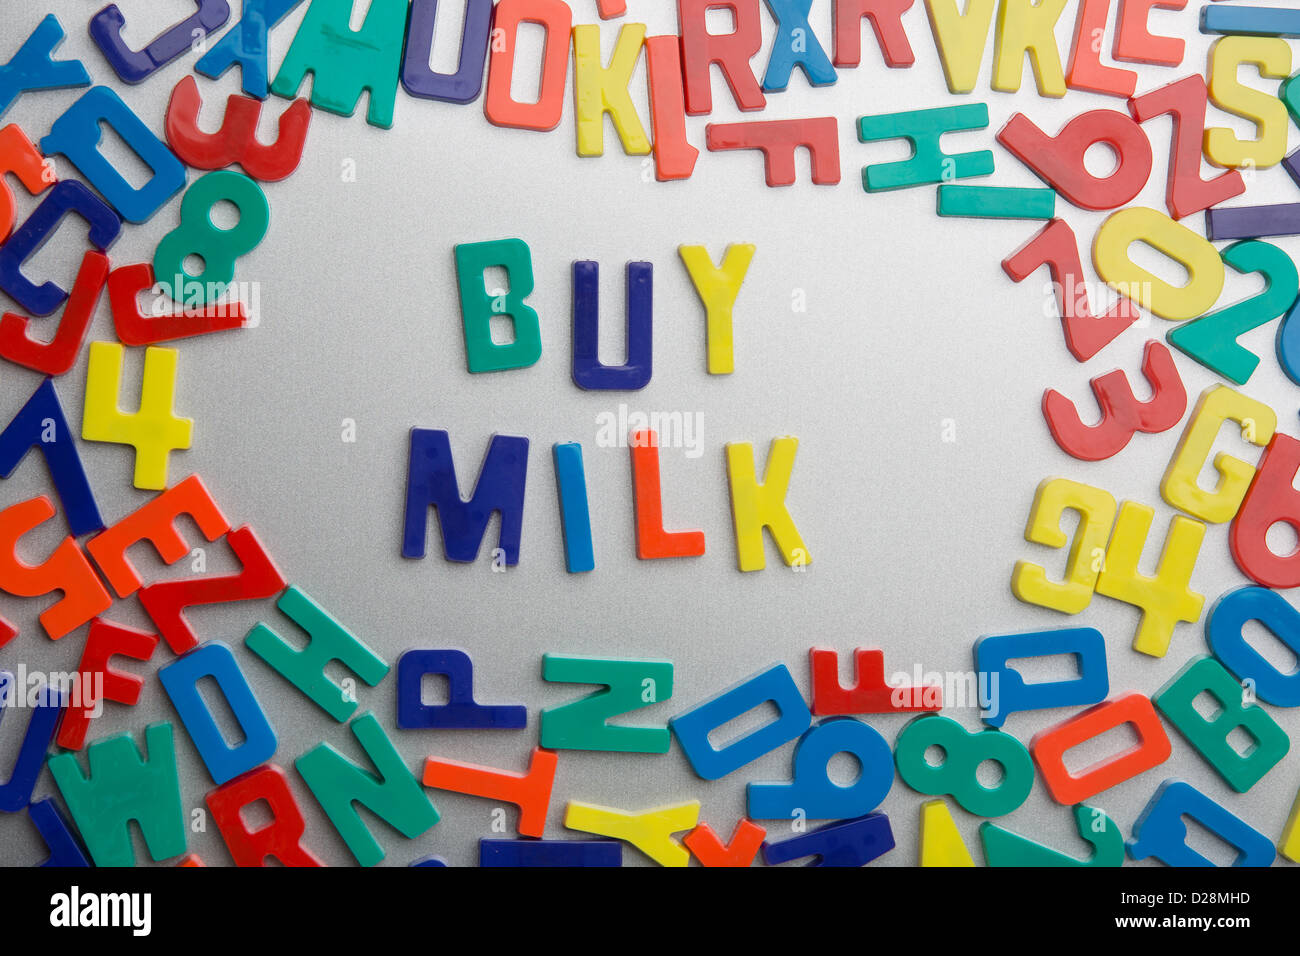 'Buy Milk' - Refrigerator magnet spells a message out of a jumble of letters Stock Photo